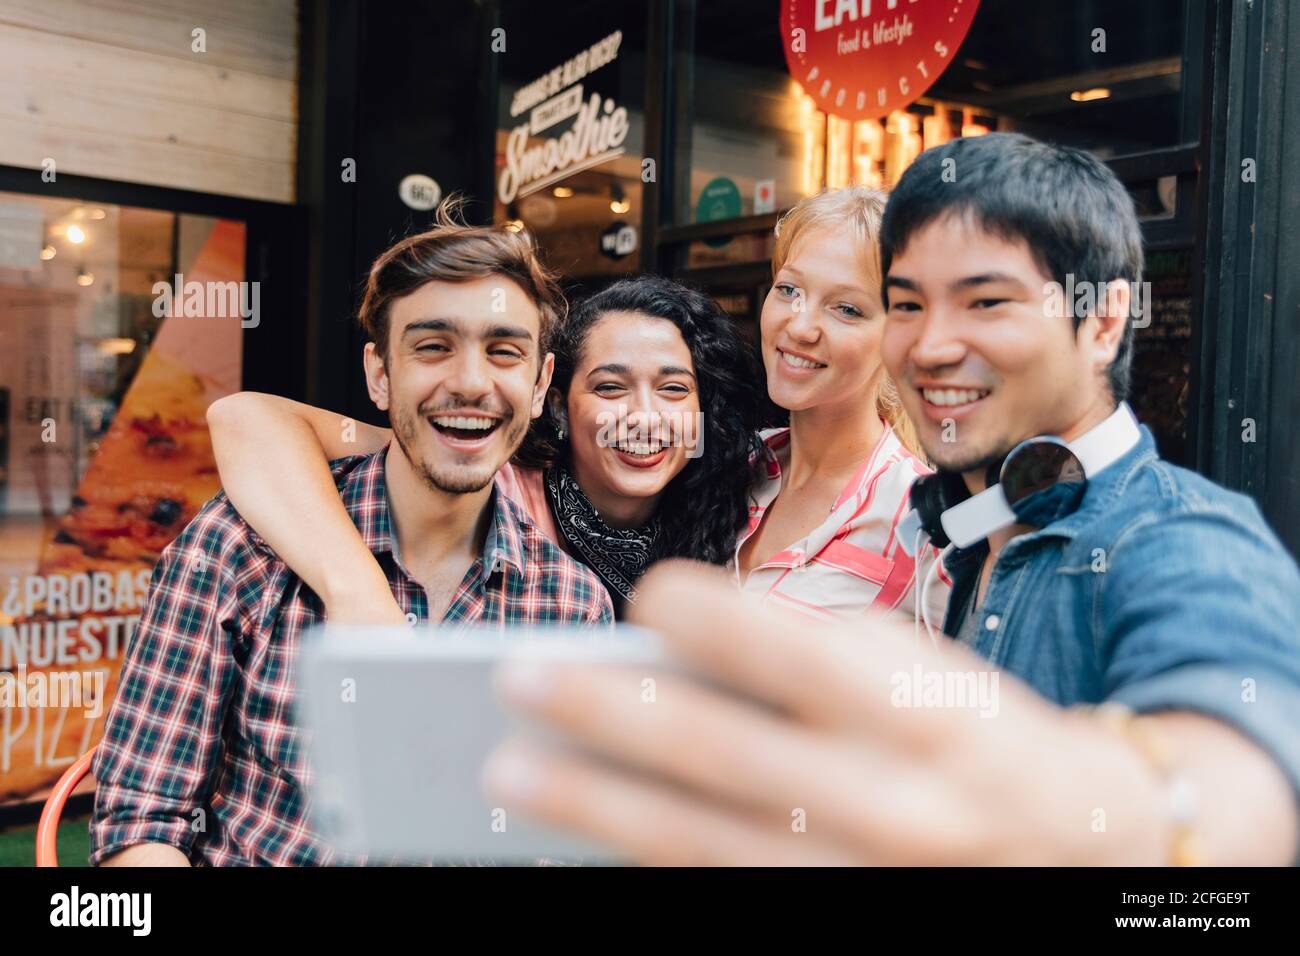 Cheerful friends taking a selfie Stock Photo